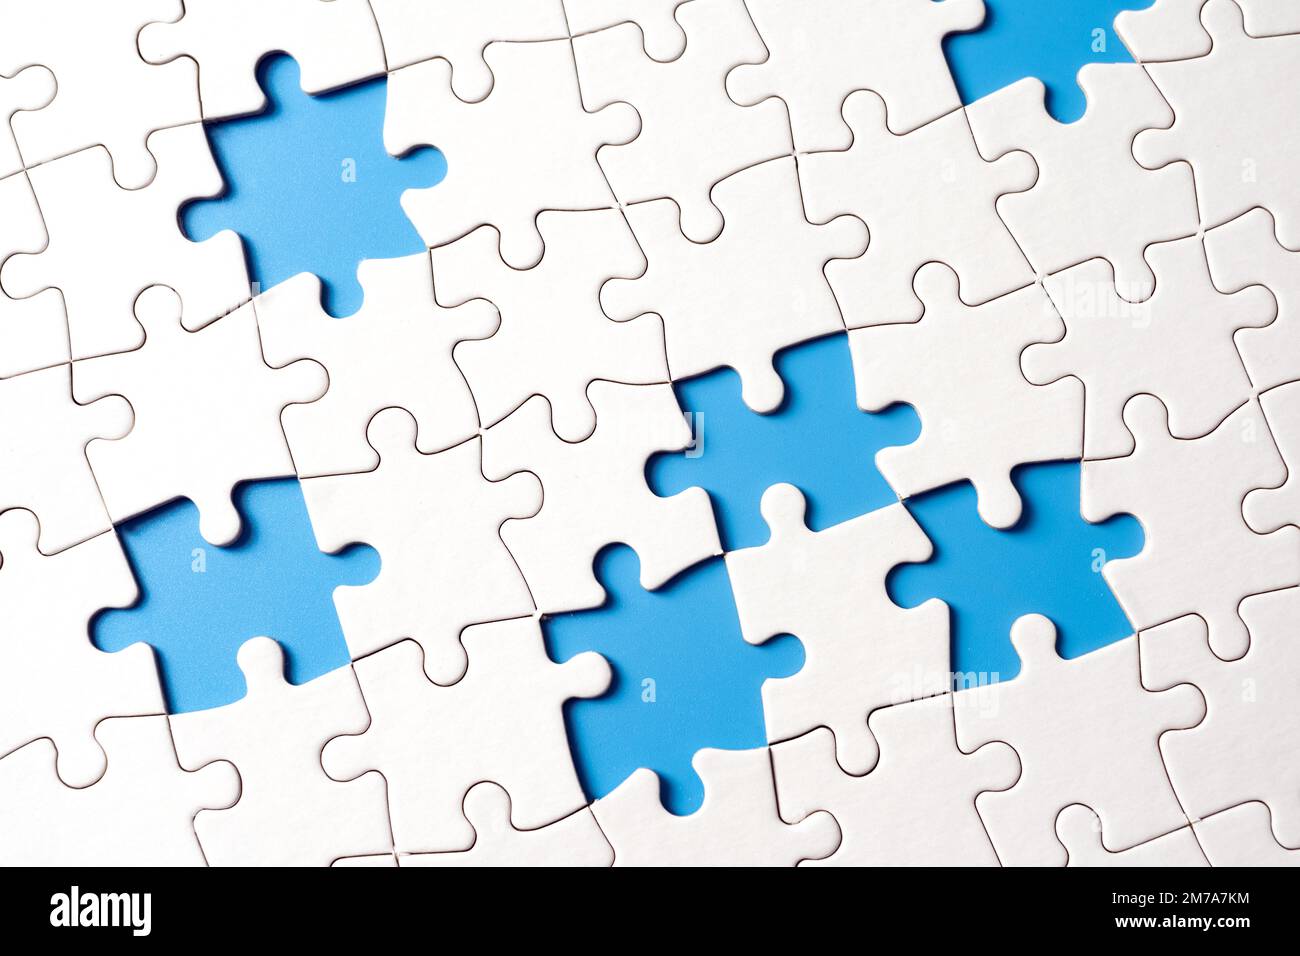 Puzzle with missing pieces Stock Photo - Alamy